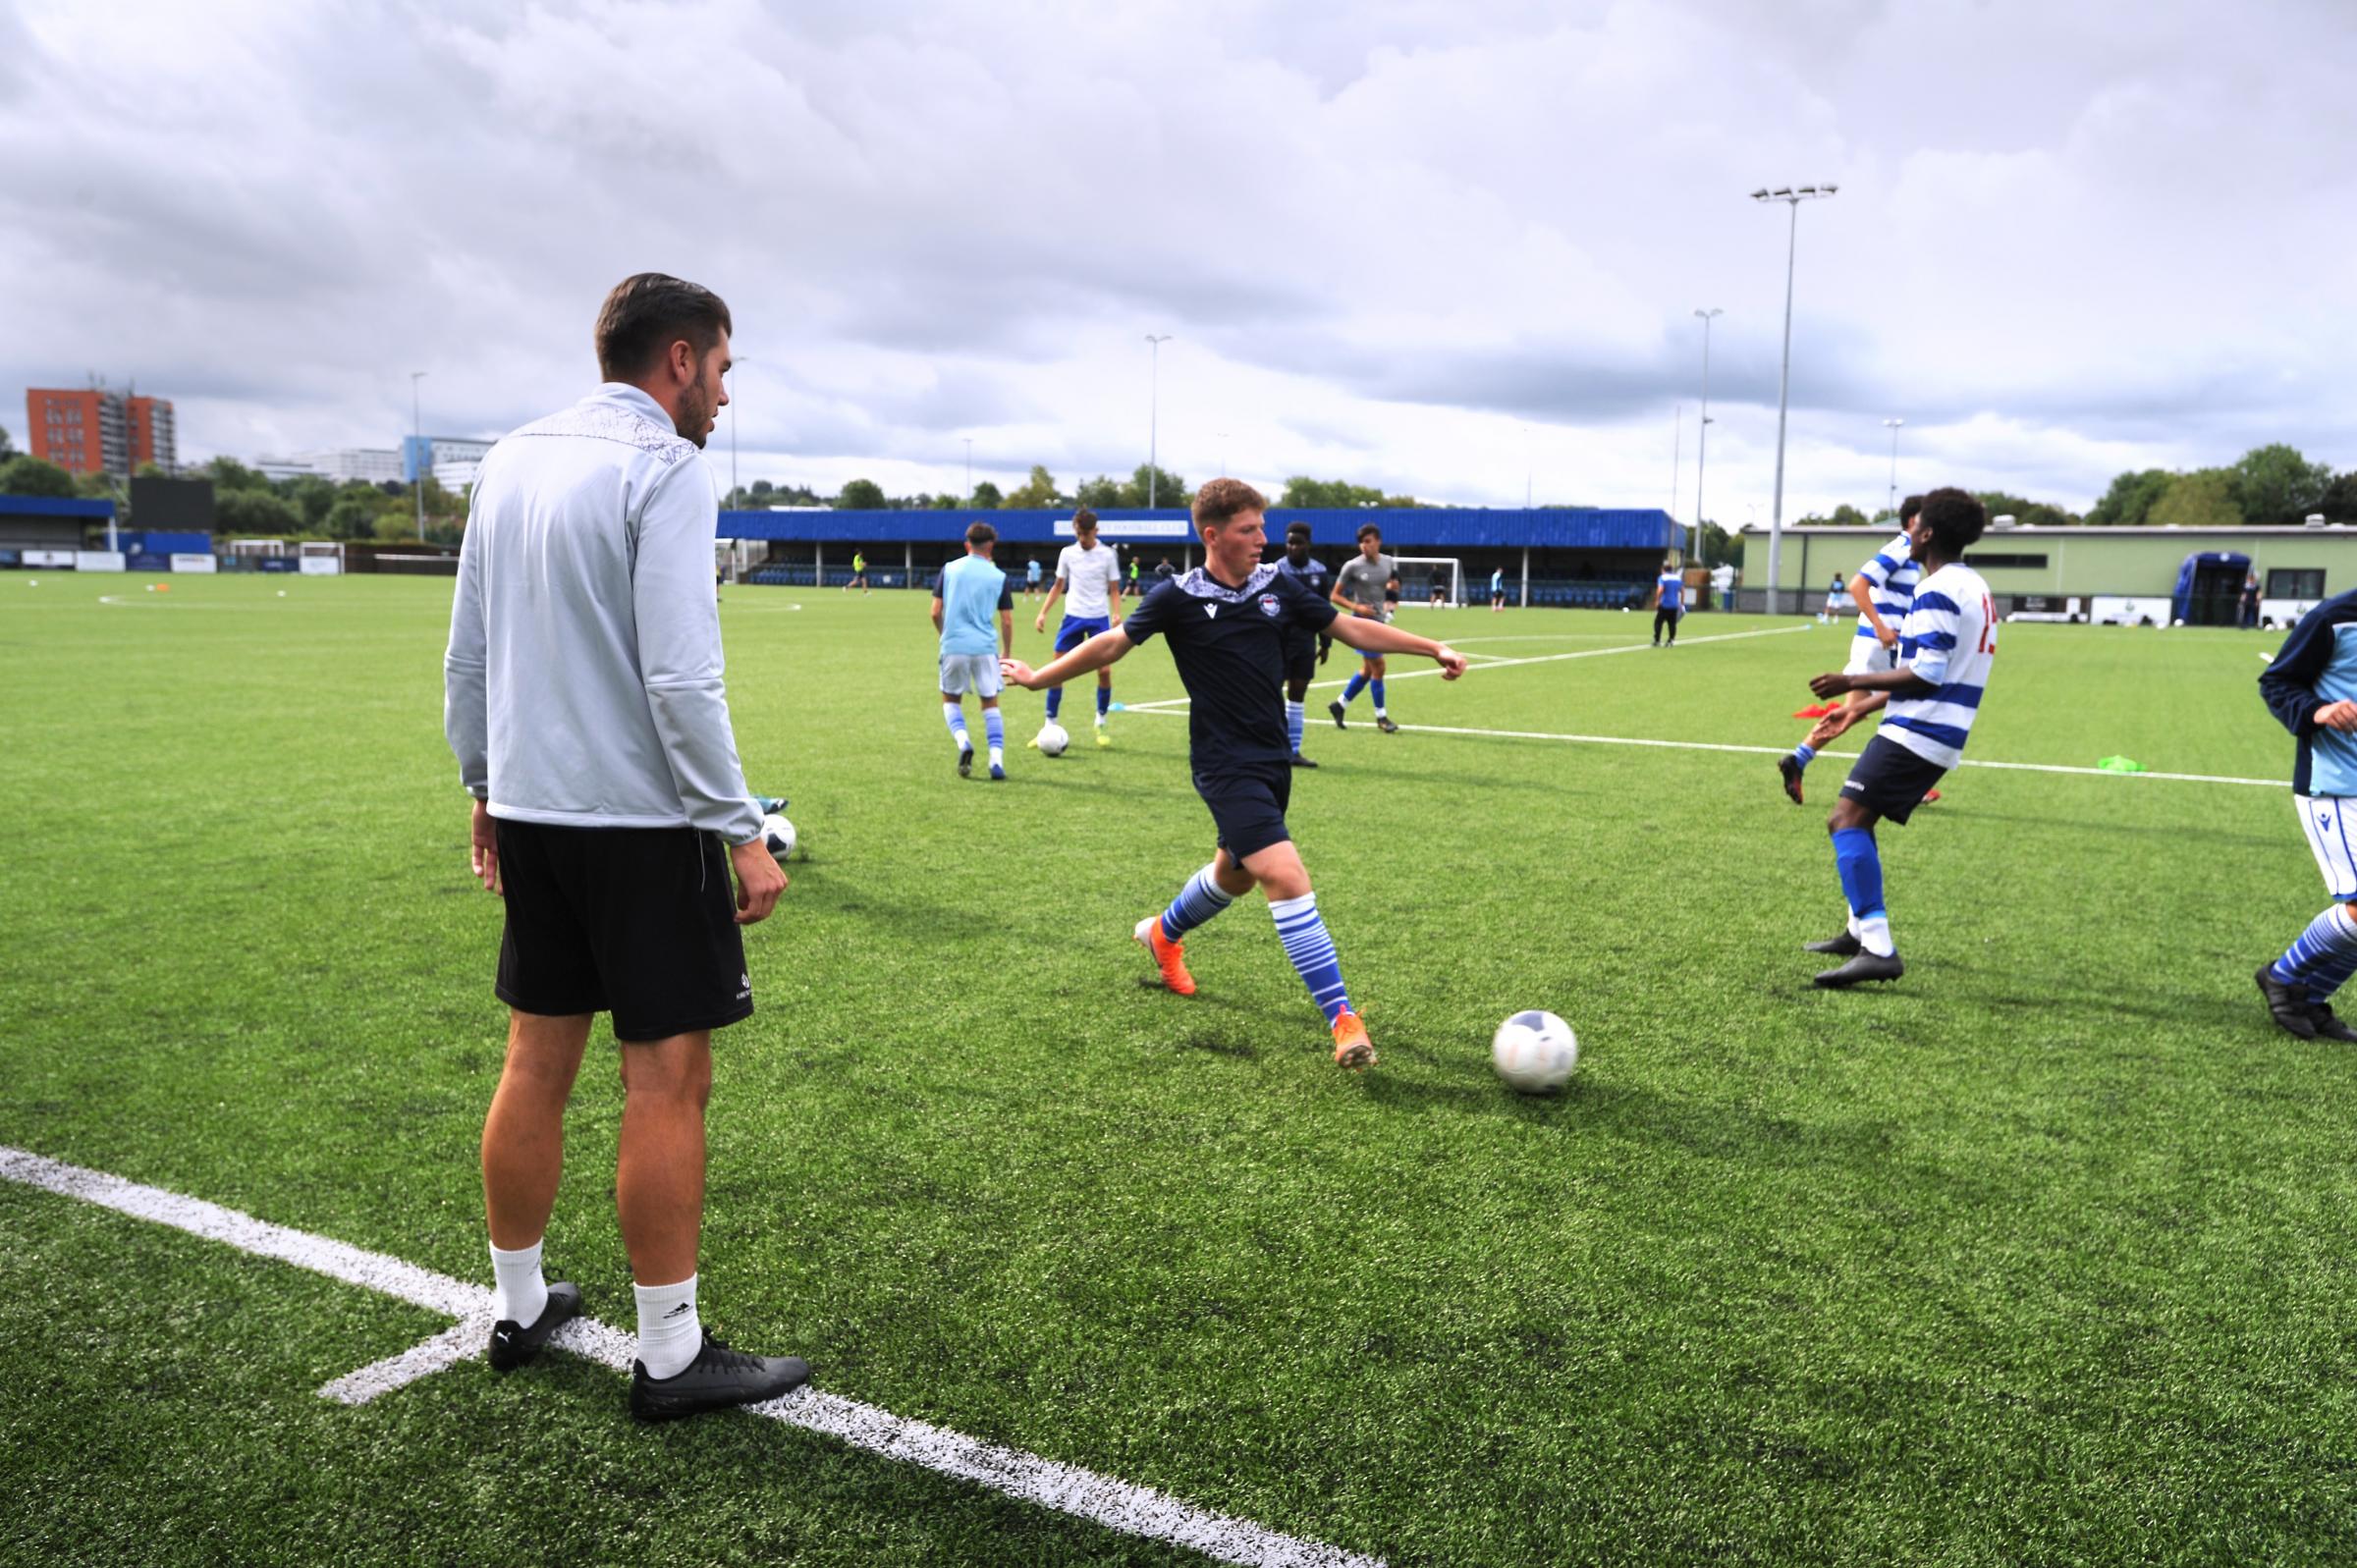  The Velocity football programme for 16-23-year-olds- based at Oxford City FCs Court Place Farm- offers academic and BTEC qualifications as well as the chance to join the clubs training academy. Pic by Jon Lewis/ Fortitude Communications.